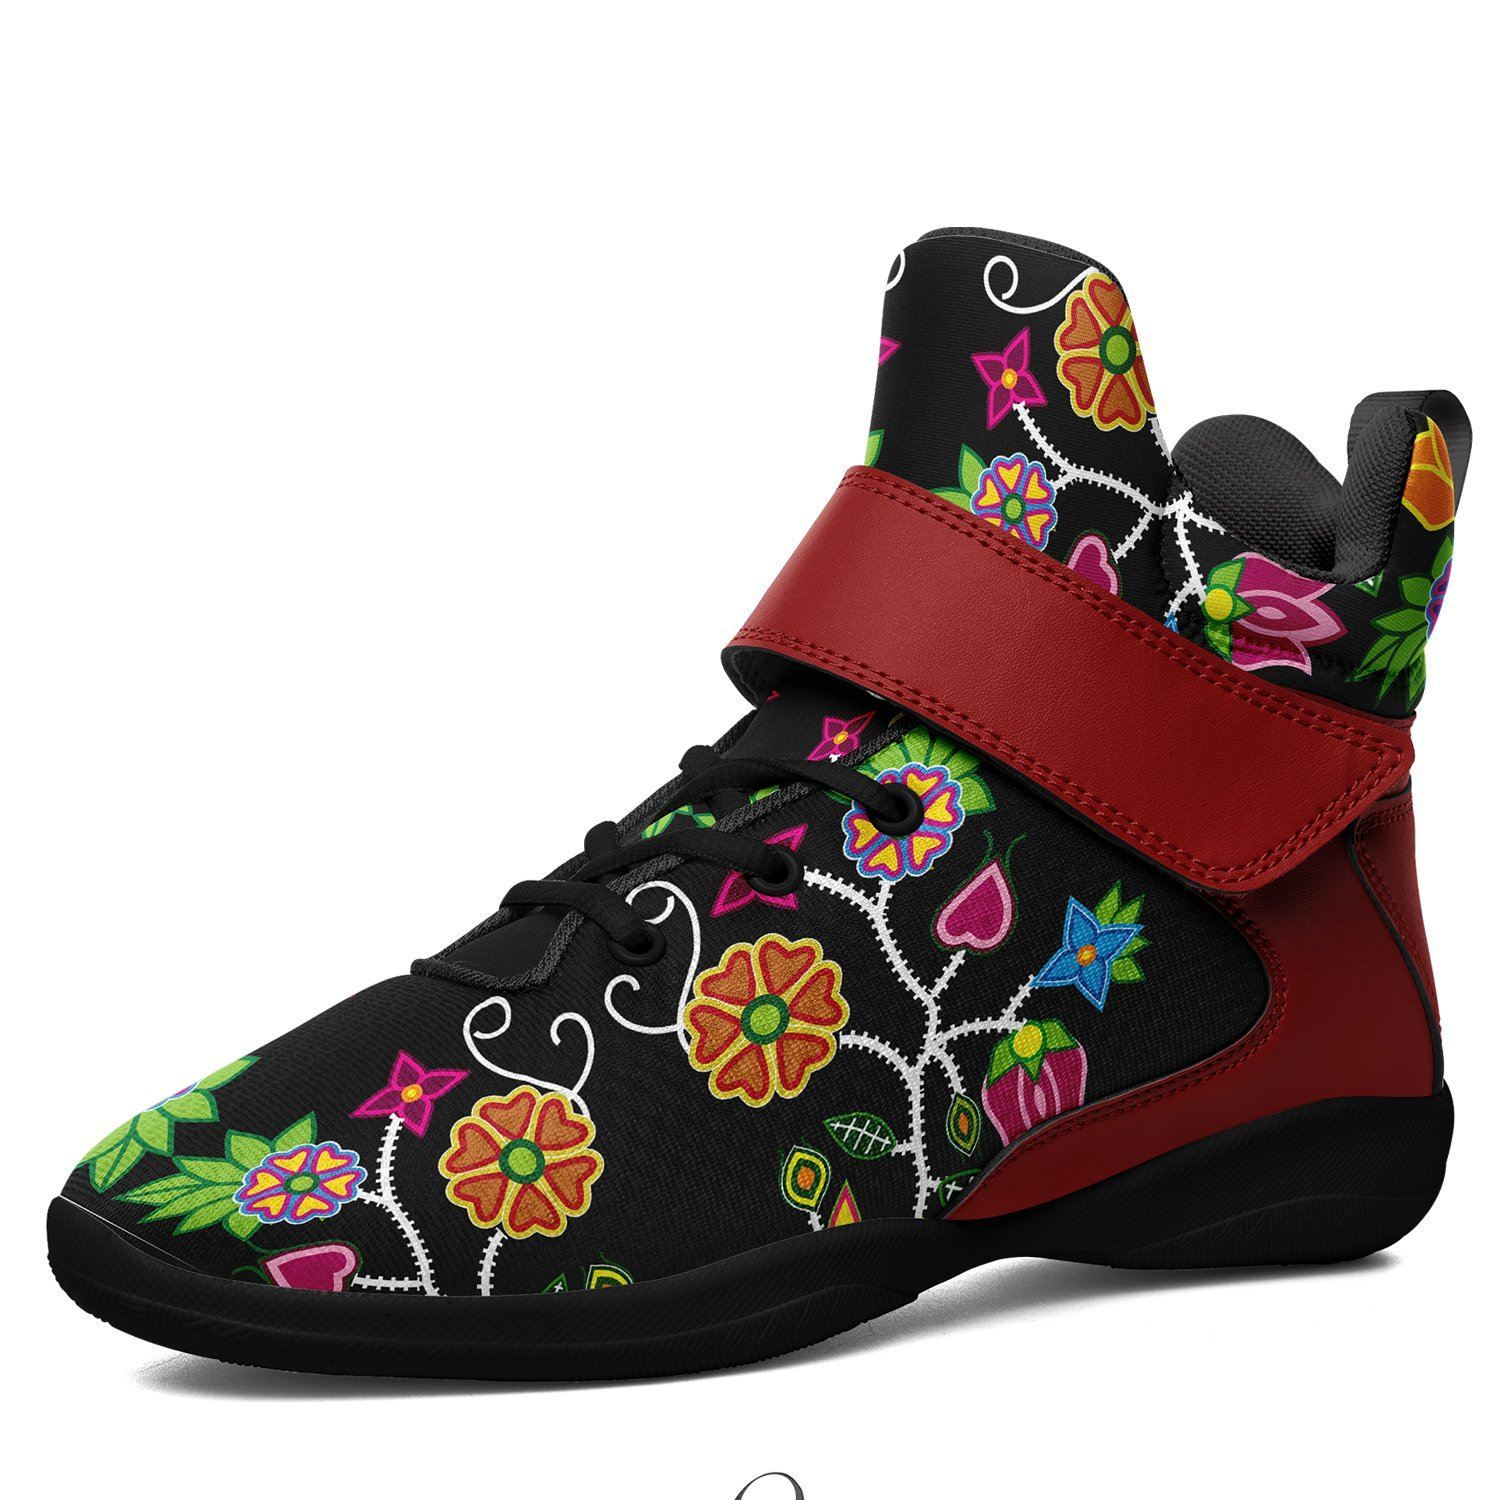 Floral Beadwork Kid's Ipottaa Basketball / Sport High Top Shoes 49 Dzine US Child 12.5 / EUR 30 Black Sole with Dark Red Strap 